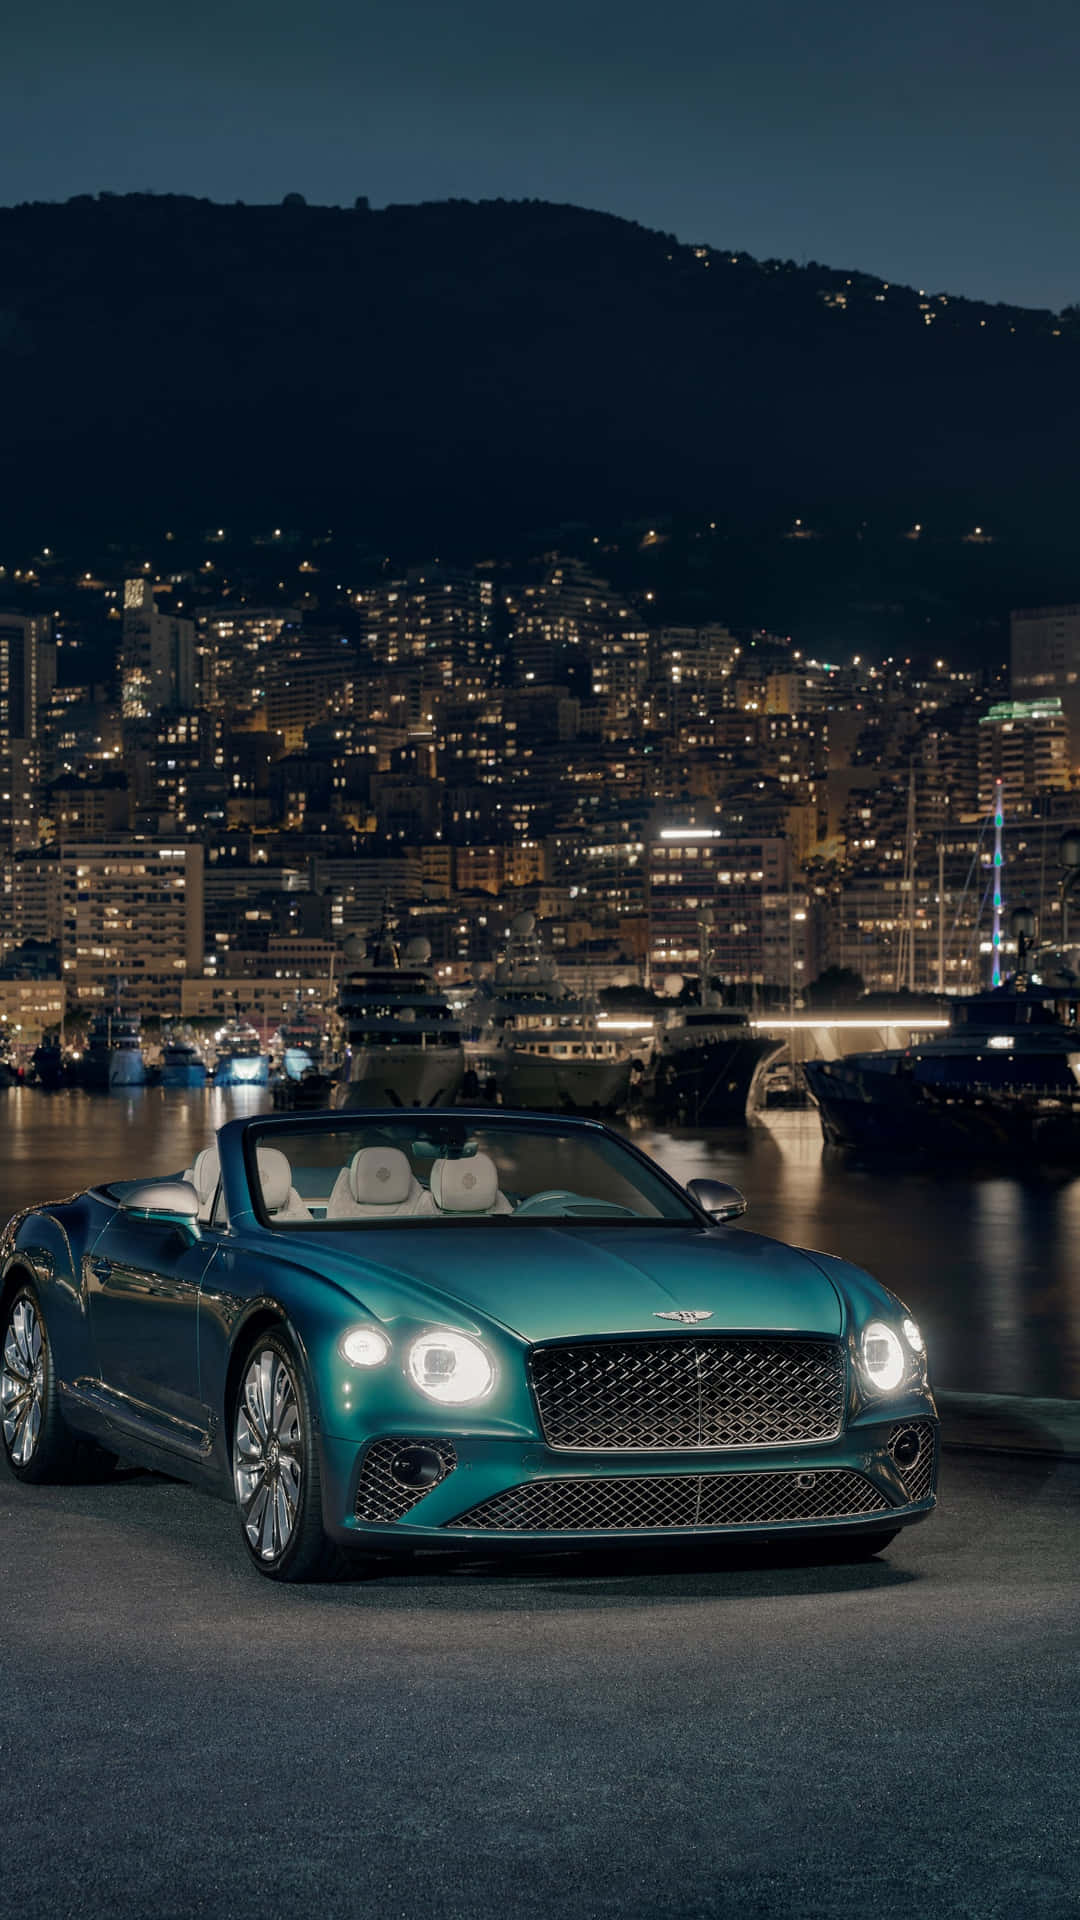 Sleek and luxurious Bentley Continental GT in its full glory Wallpaper